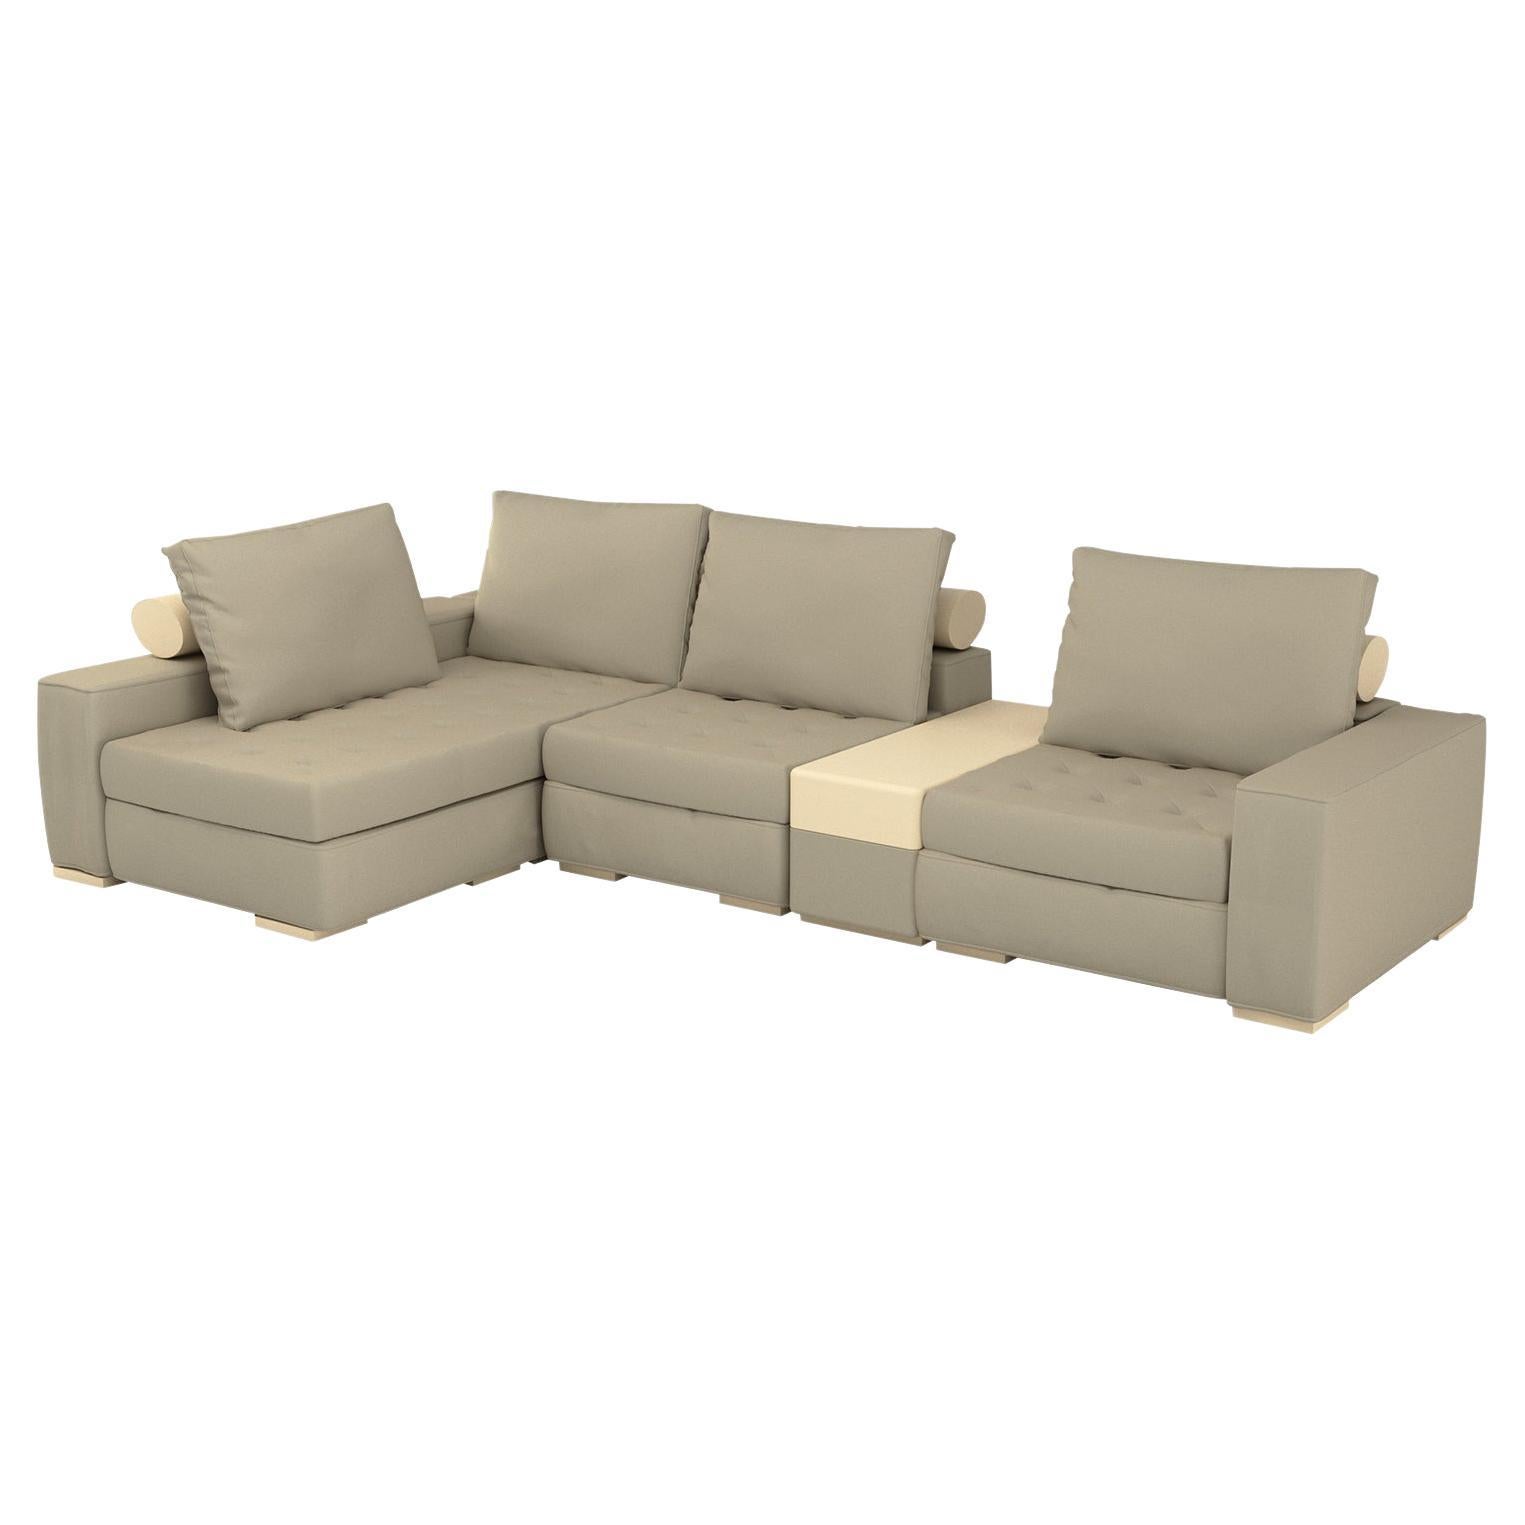 Arthur Comfortable & Modern Sectional Sofa with Modules and Bolster Cushions For Sale